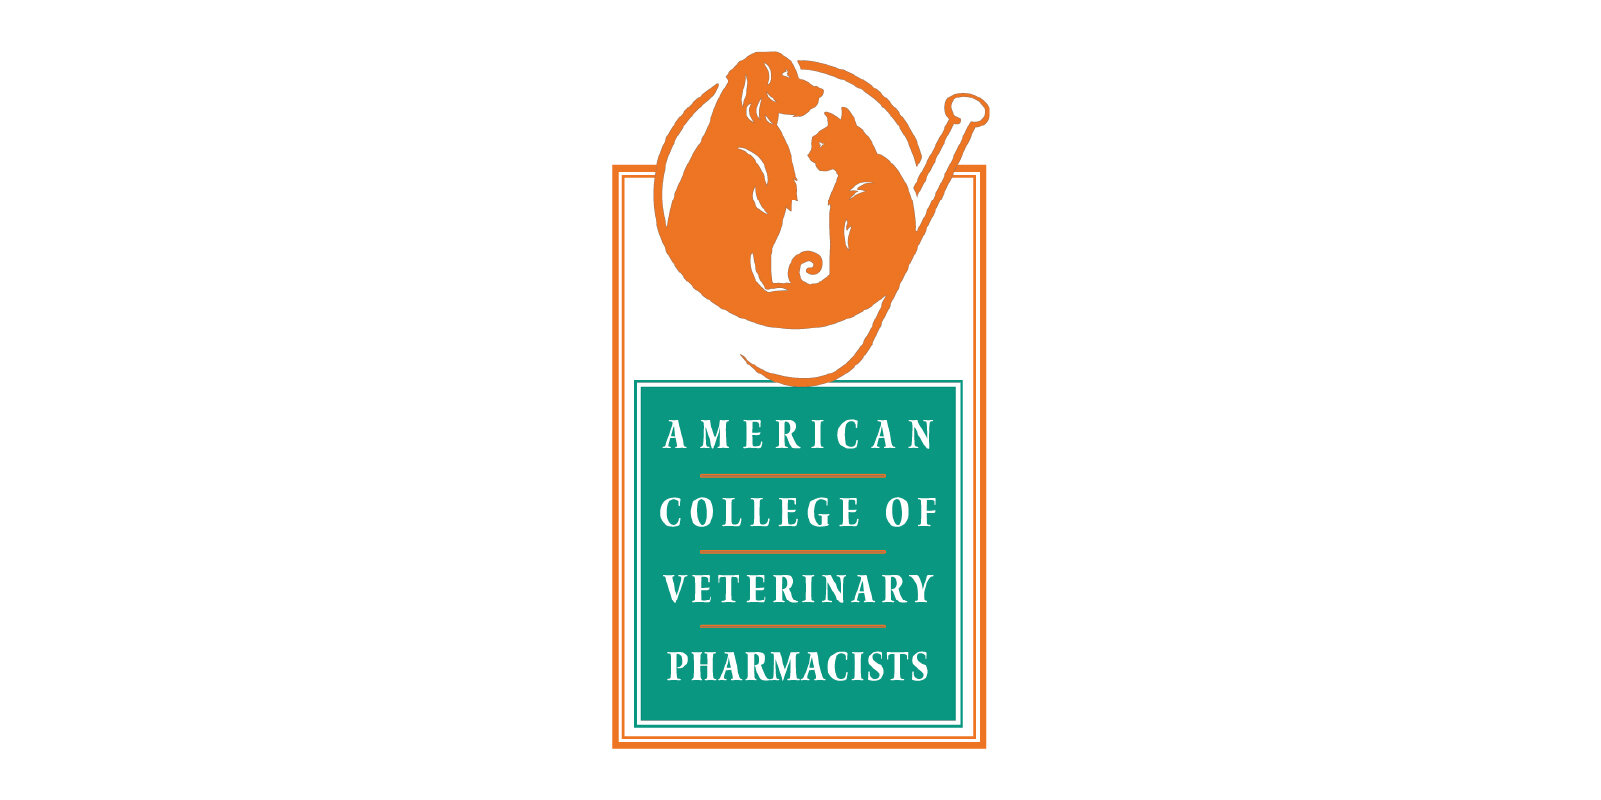 prescription-compounding-for-human-and-veterinary-clients-florence-sc-american-college-veterinary-pharmacists-icon.jpg